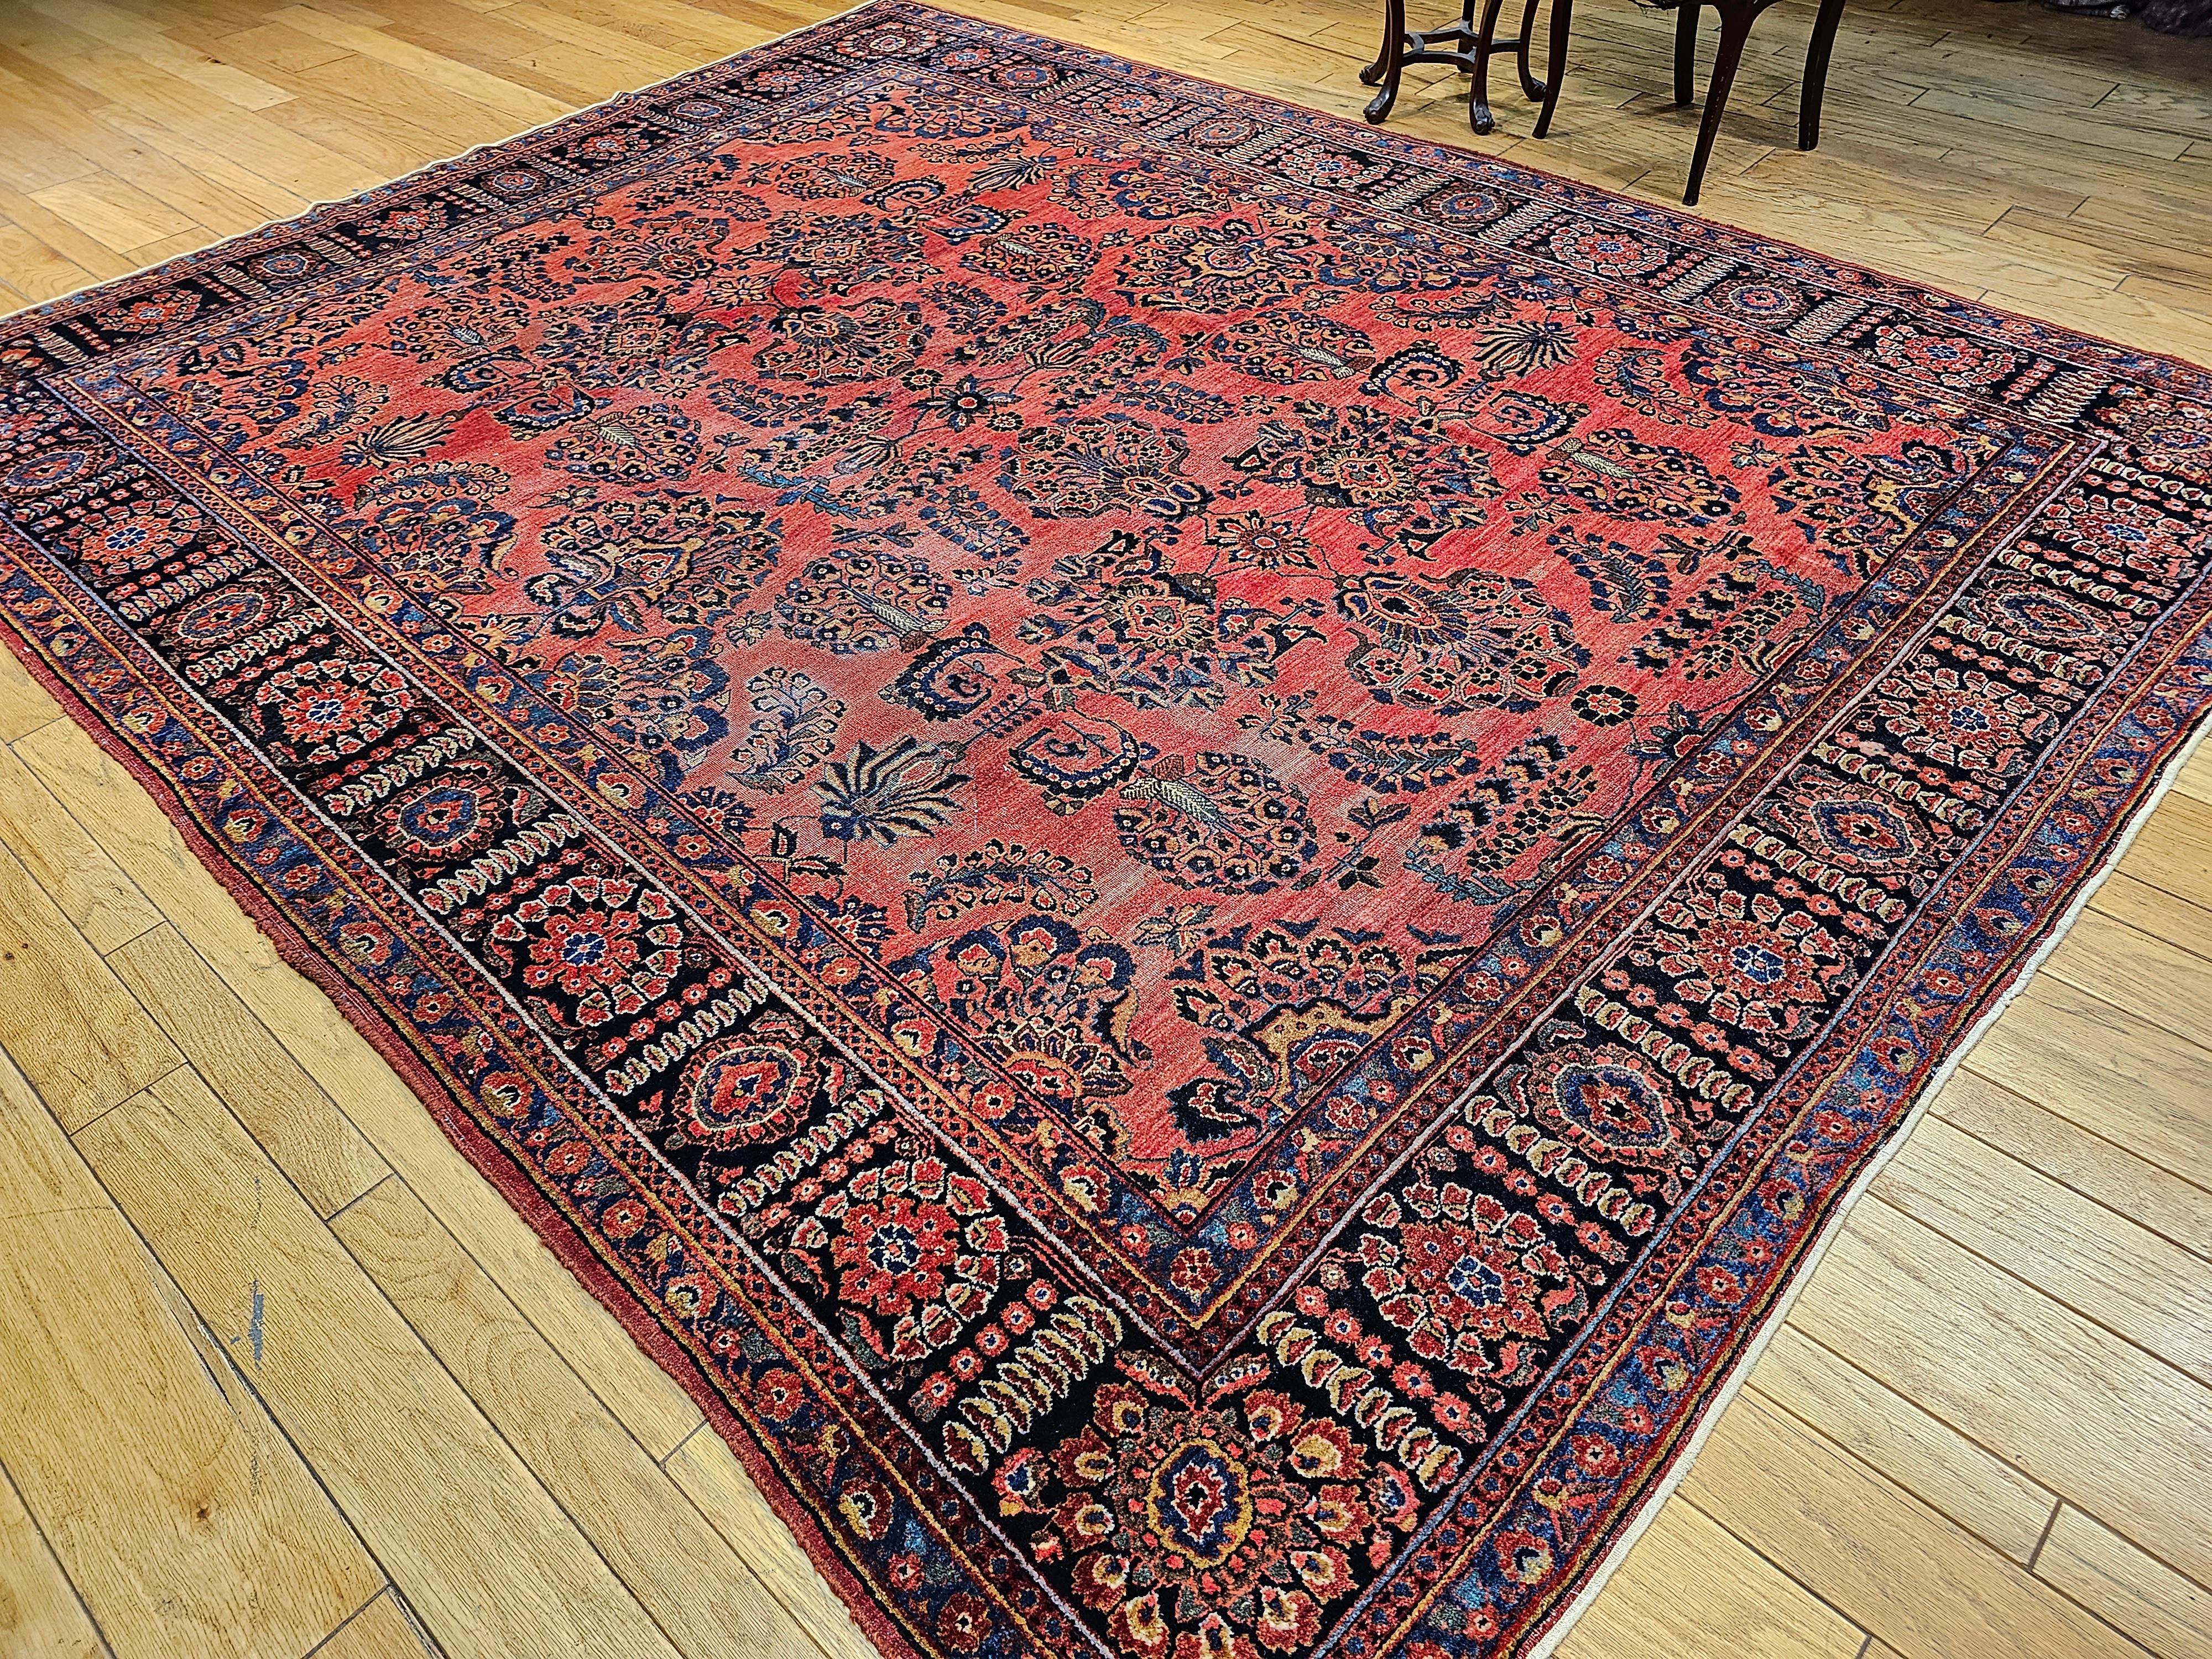 Vintage Persian Sarouk in Allover Pattern in Dark Red, French Blue, Yellow, Pink 7